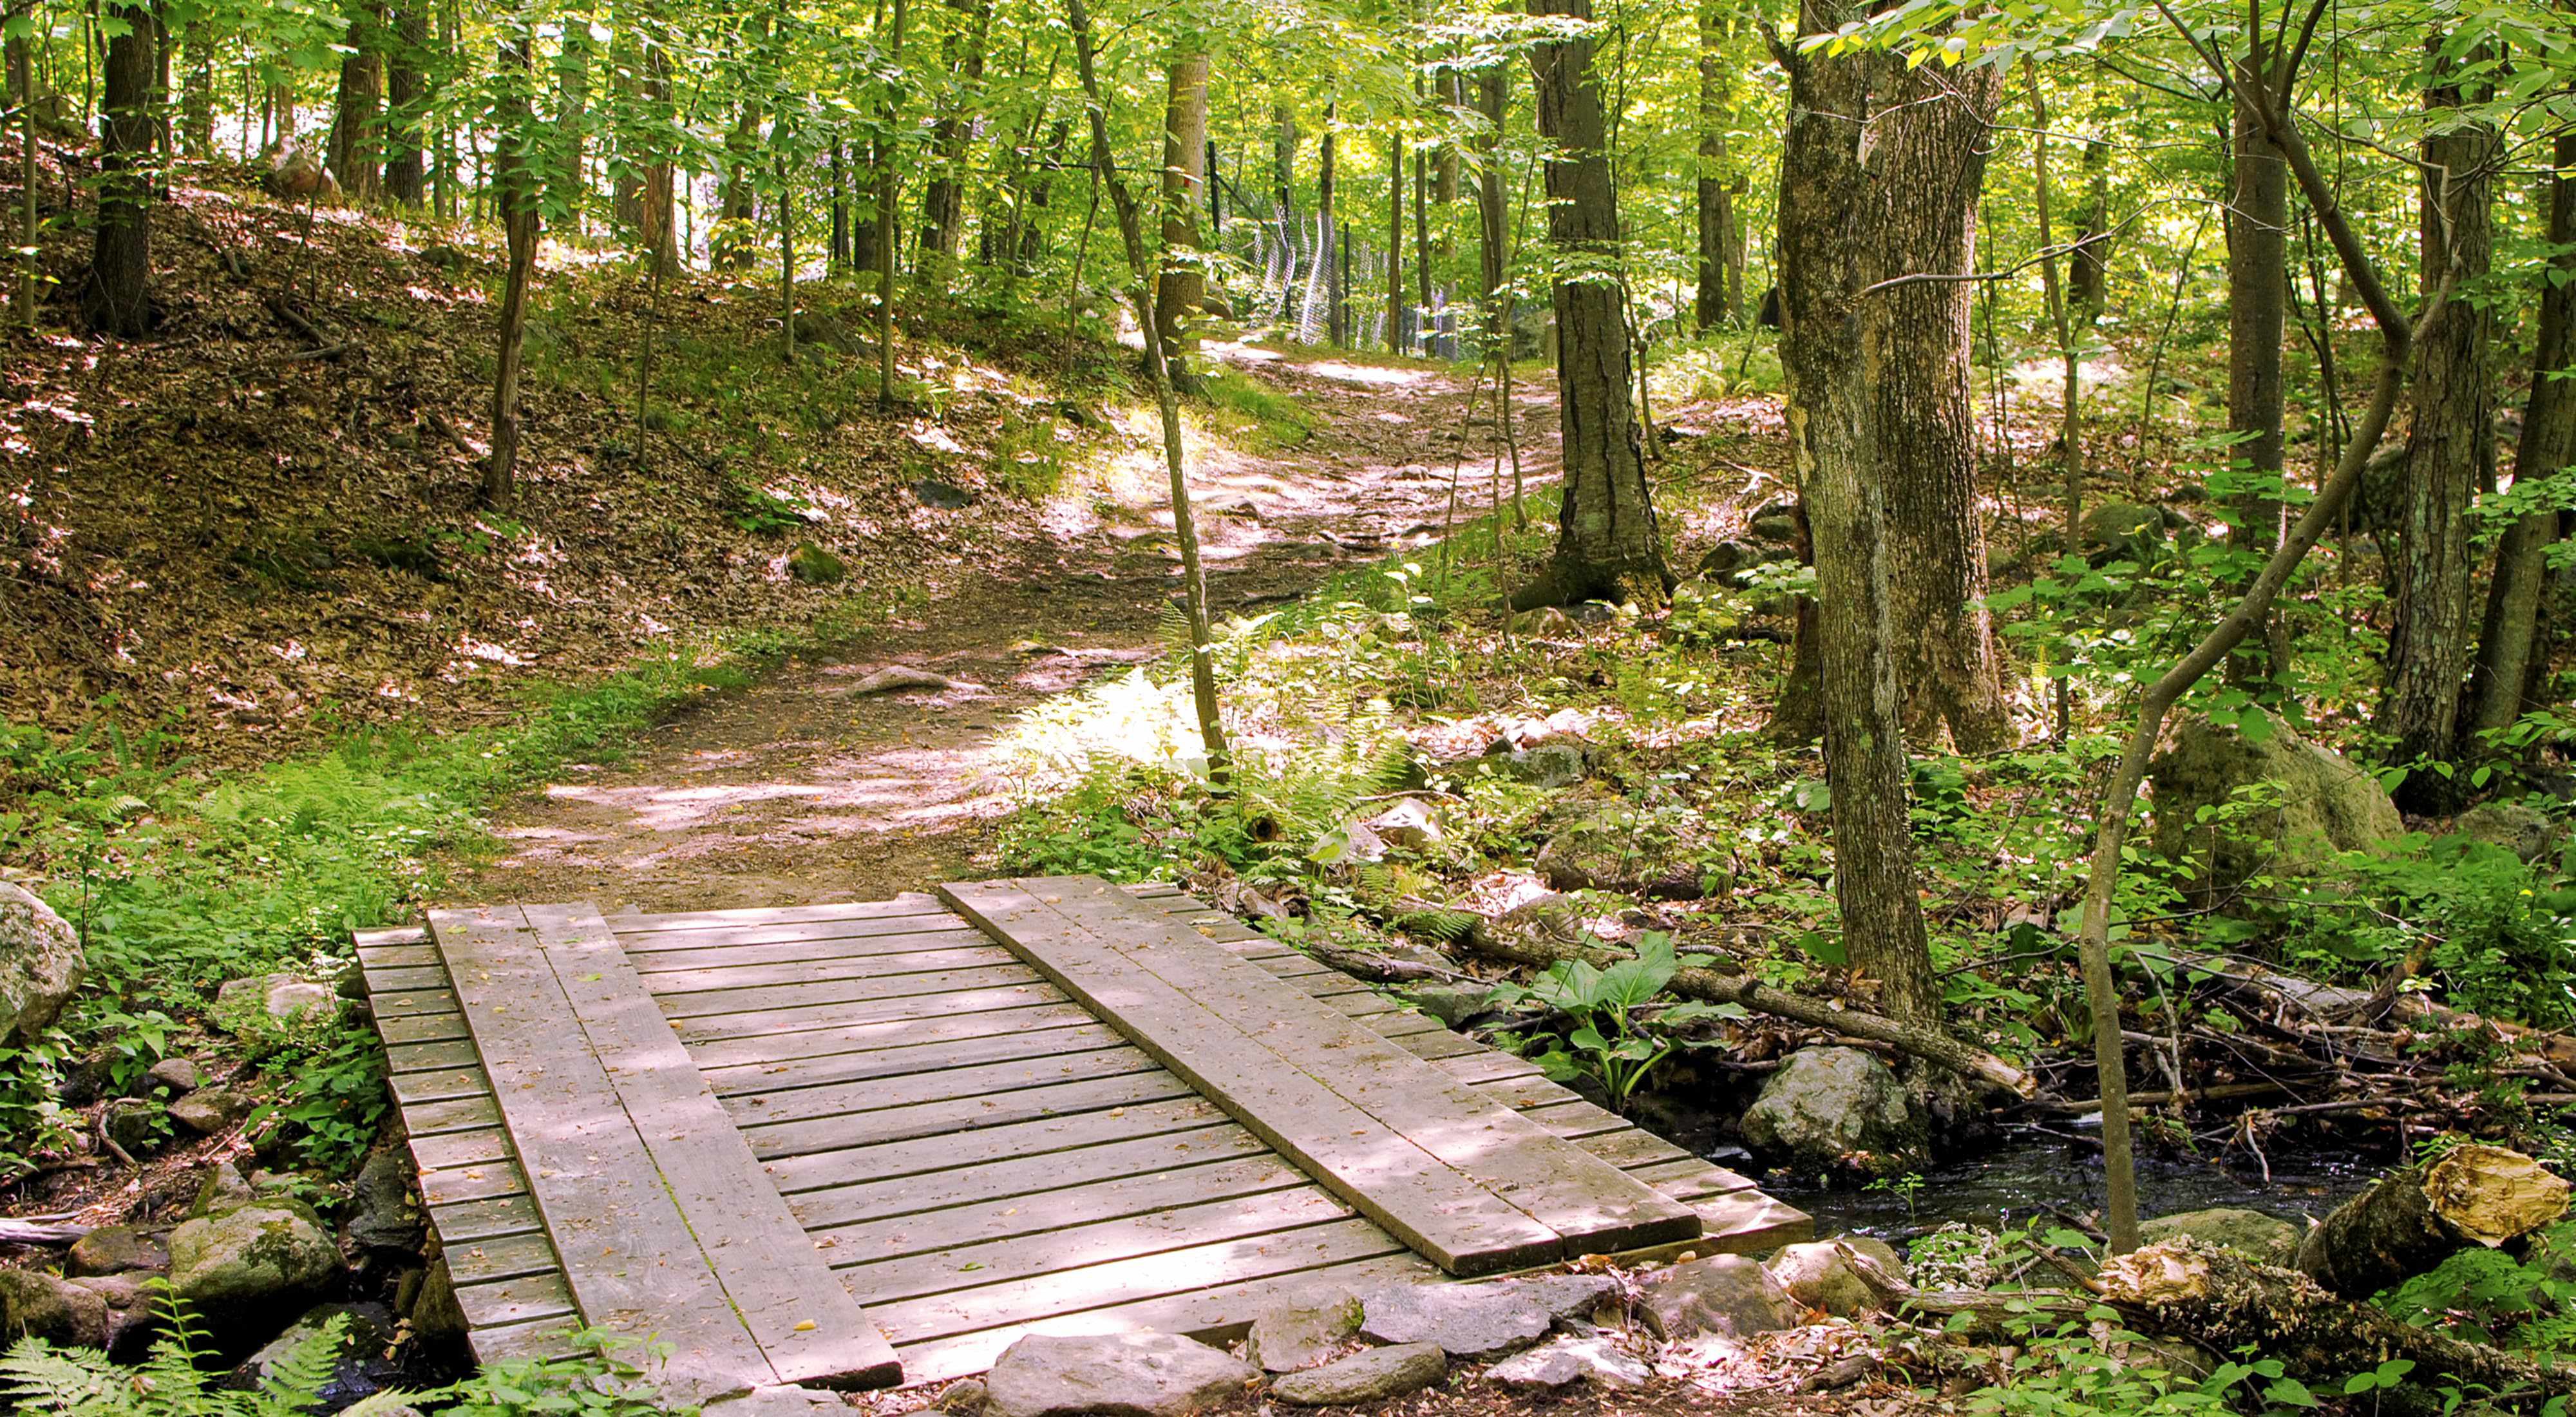 A wooden foot bridge over a small creek leads to a trail through leafy green woods.